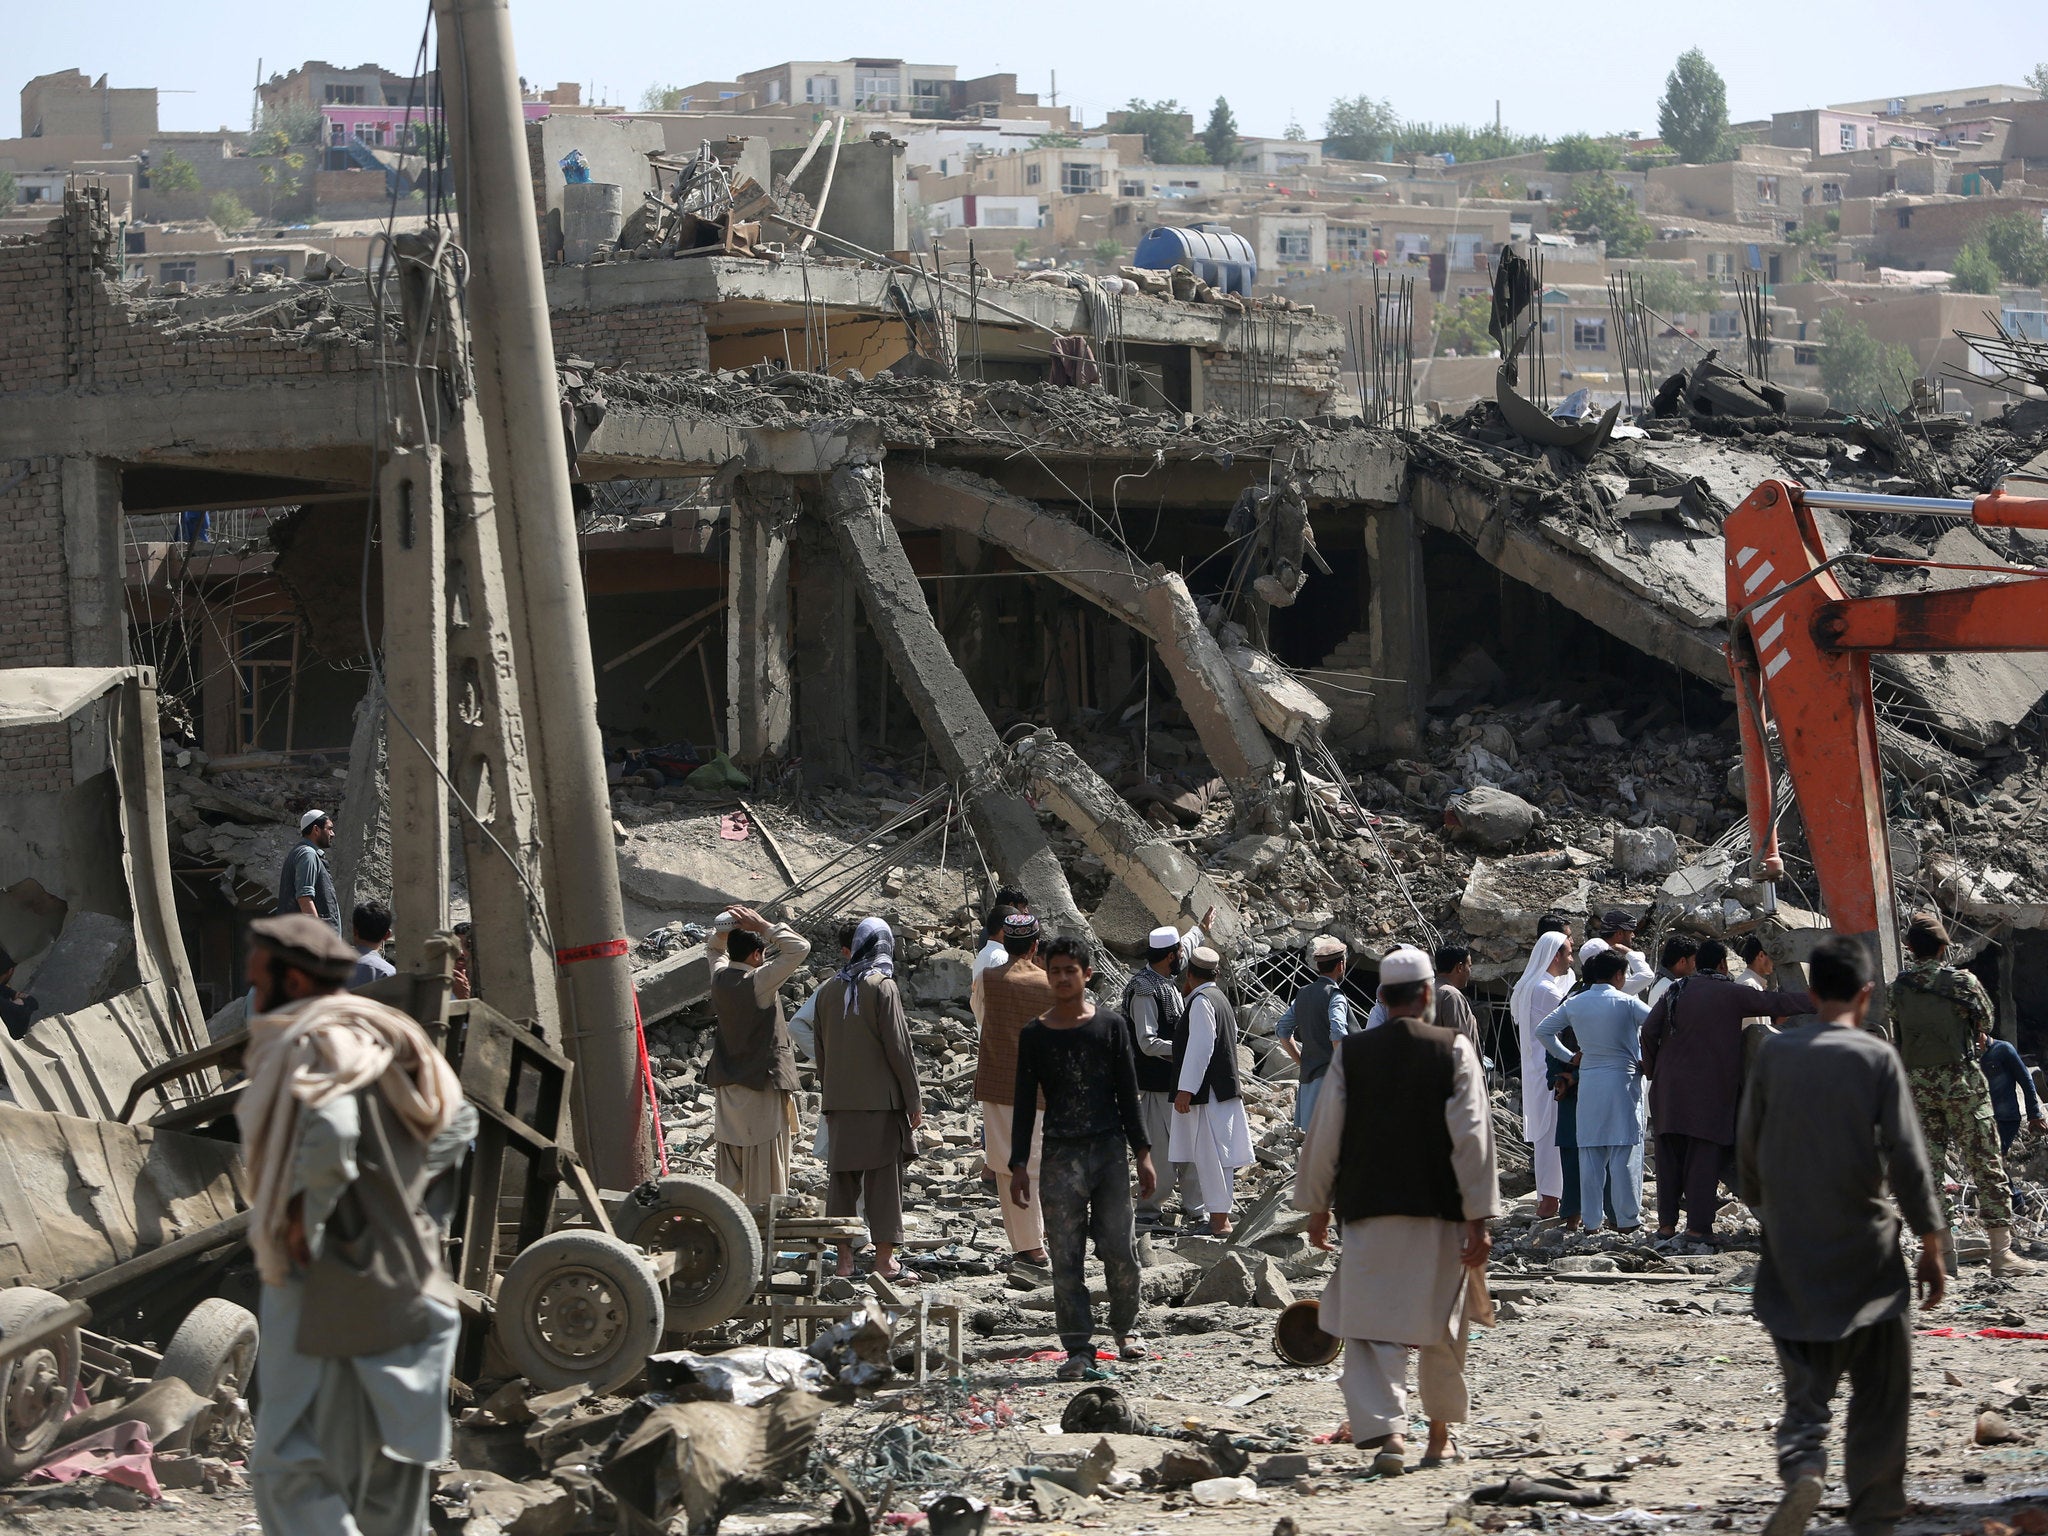 In the early hours of Friday morning the hidden truck bomb which detonated near an army base killed 15 civilians